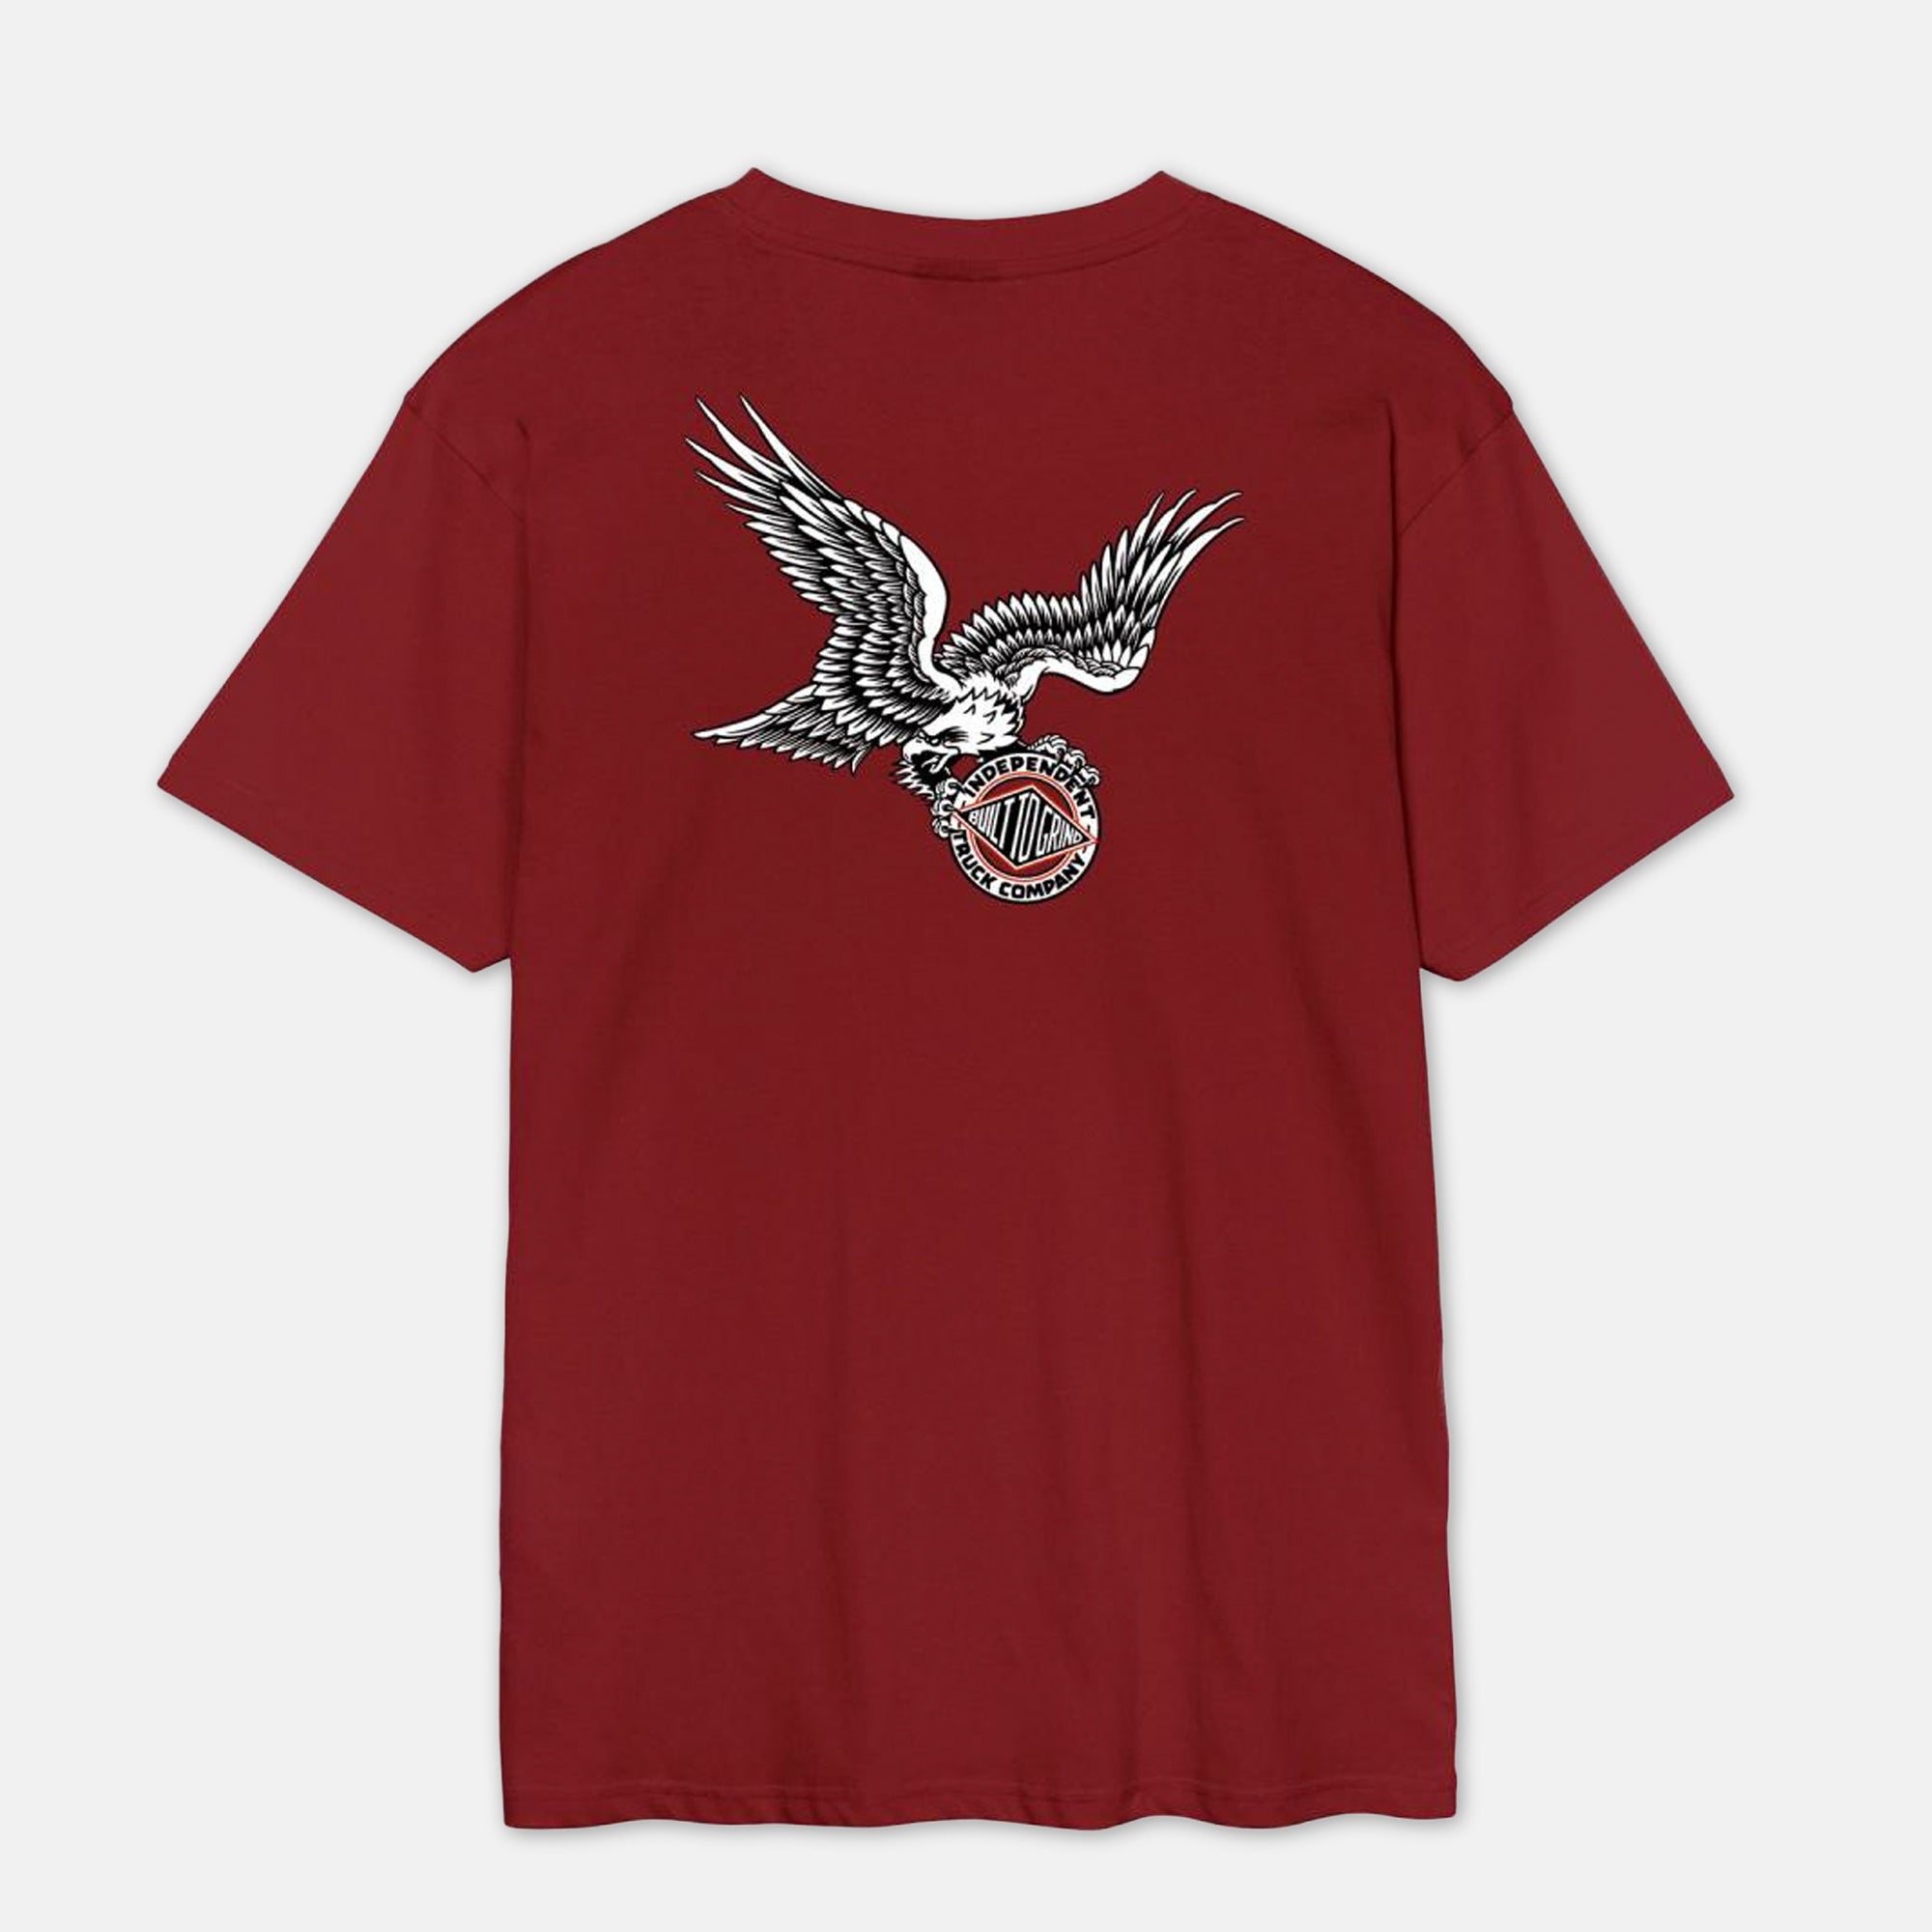 Independent Trucks - Built To Grind Eagle Summit T-Shirt - Maroon